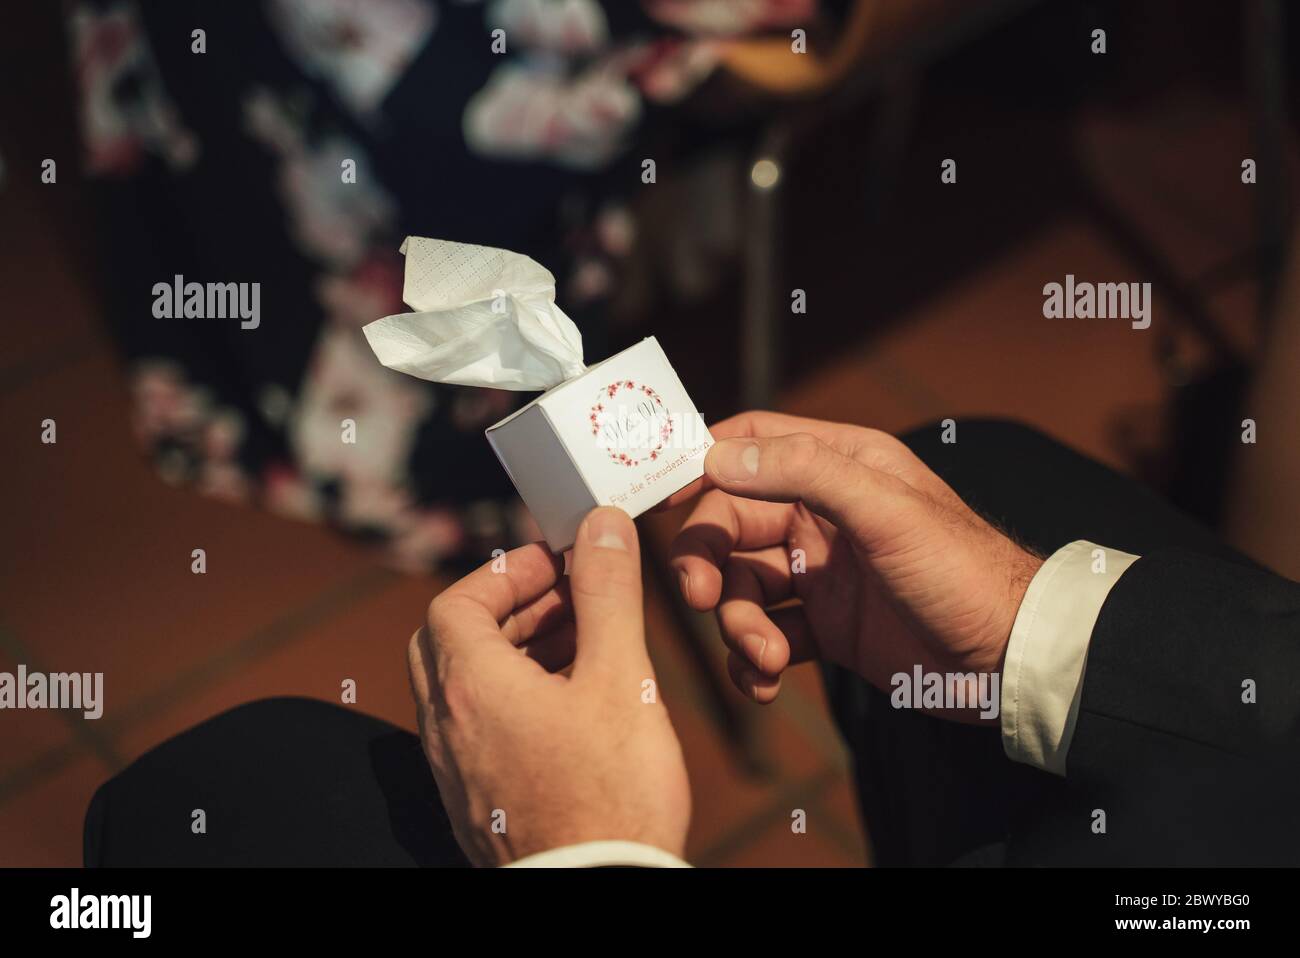 Closeup photo of formal clothed male hands holding small shite box of paper tissues. Translation: 'For tears of happiness'. Wedding day concept. Stock Photo